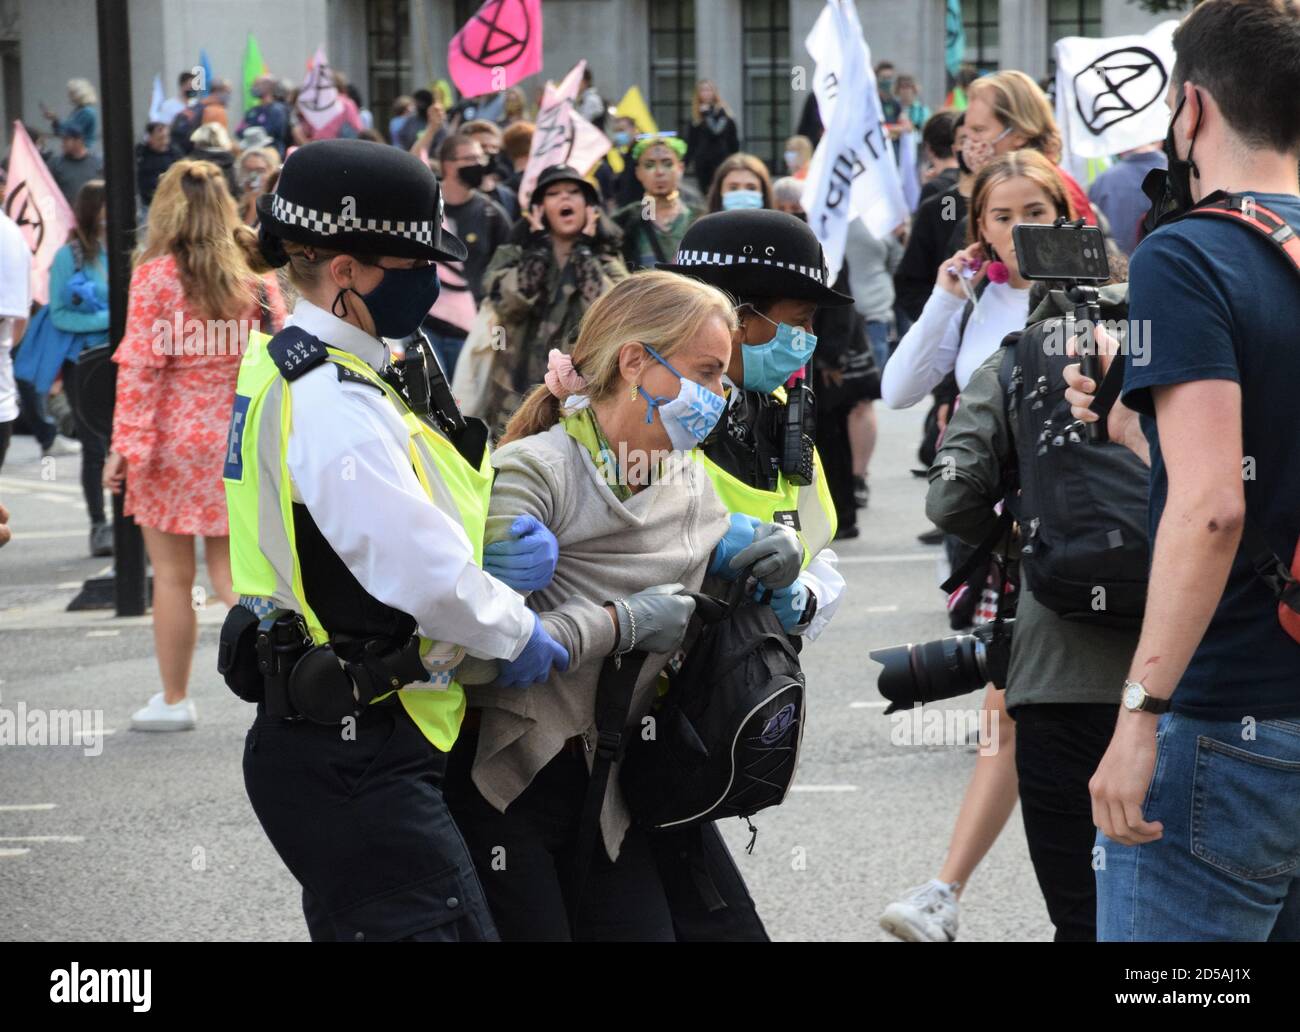 Police with protective face masks arrest a demonstrator at the Extinction Rebellion climate change and animal agriculture protest at Parliament Square, London, September 2020 Stock Photo